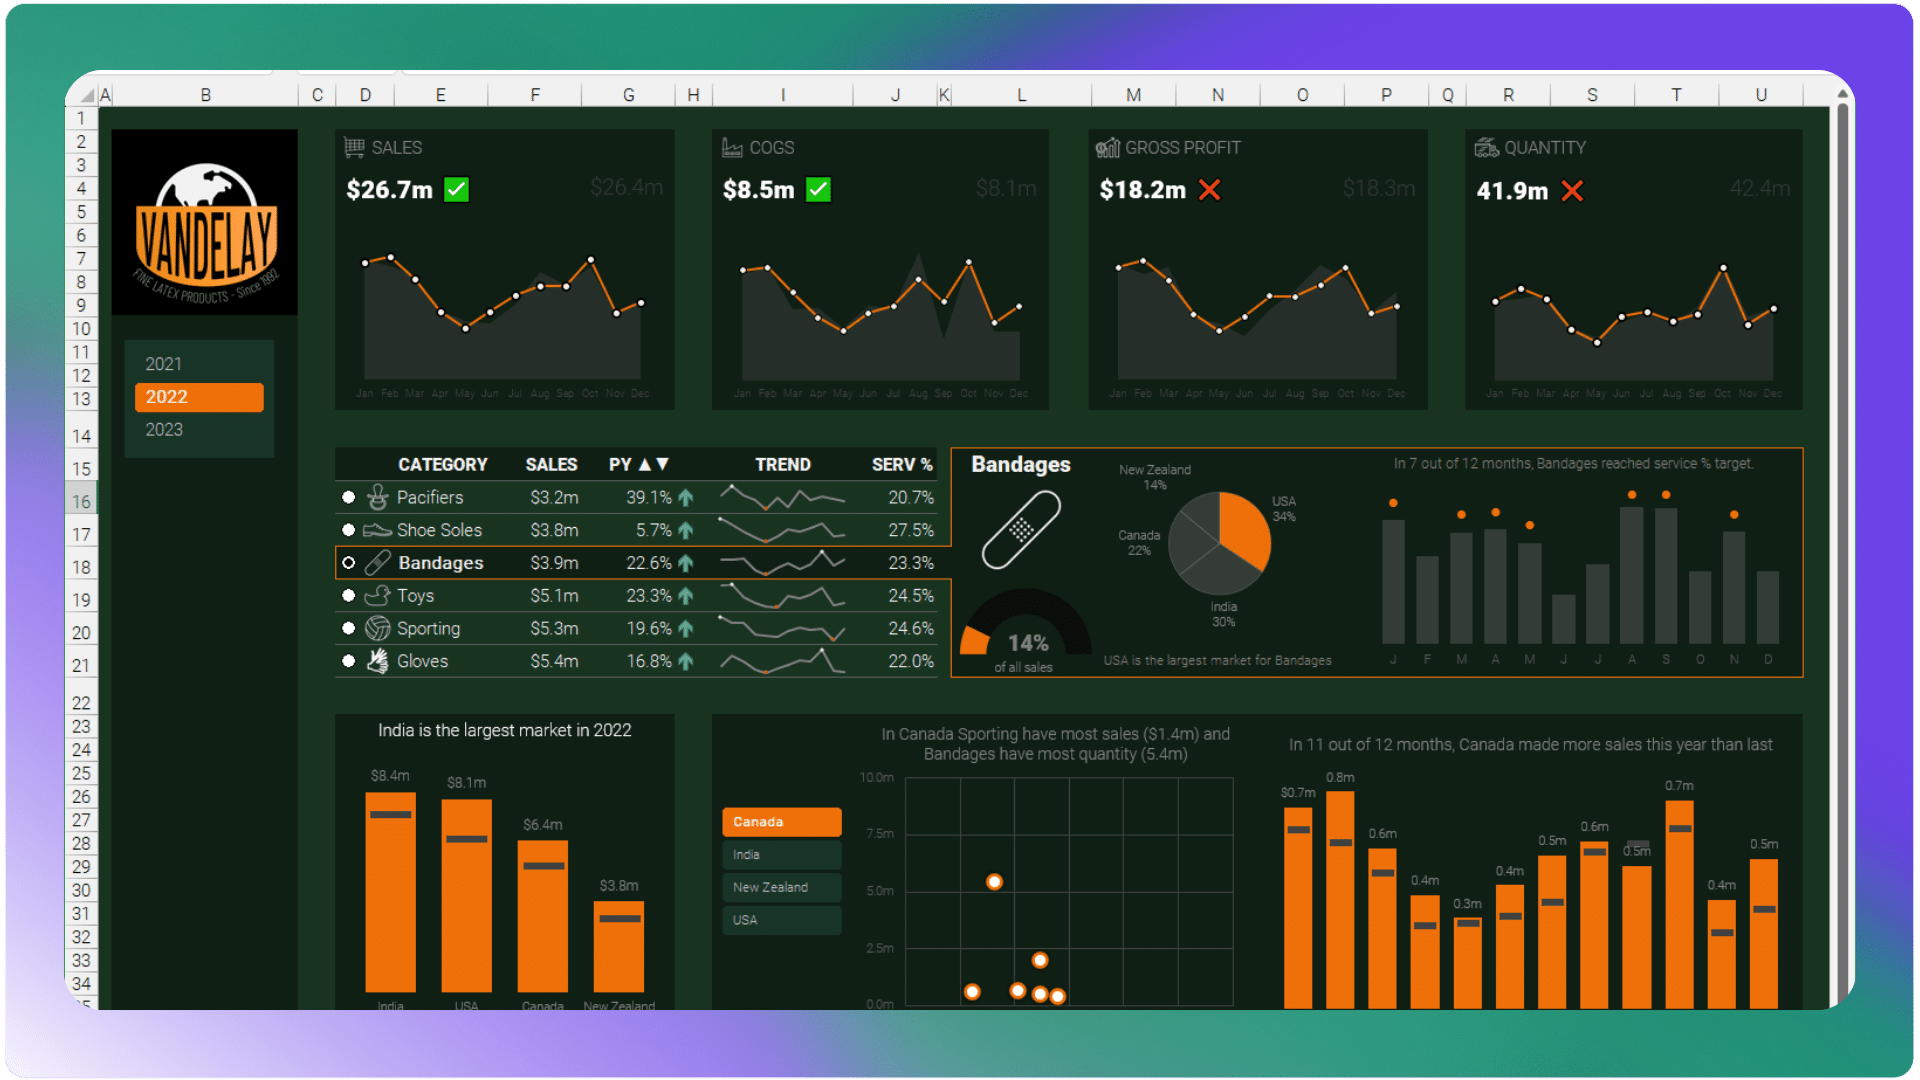 An image that shows different dashboards and interactive visualisations that are built in Excel by Chandoo.